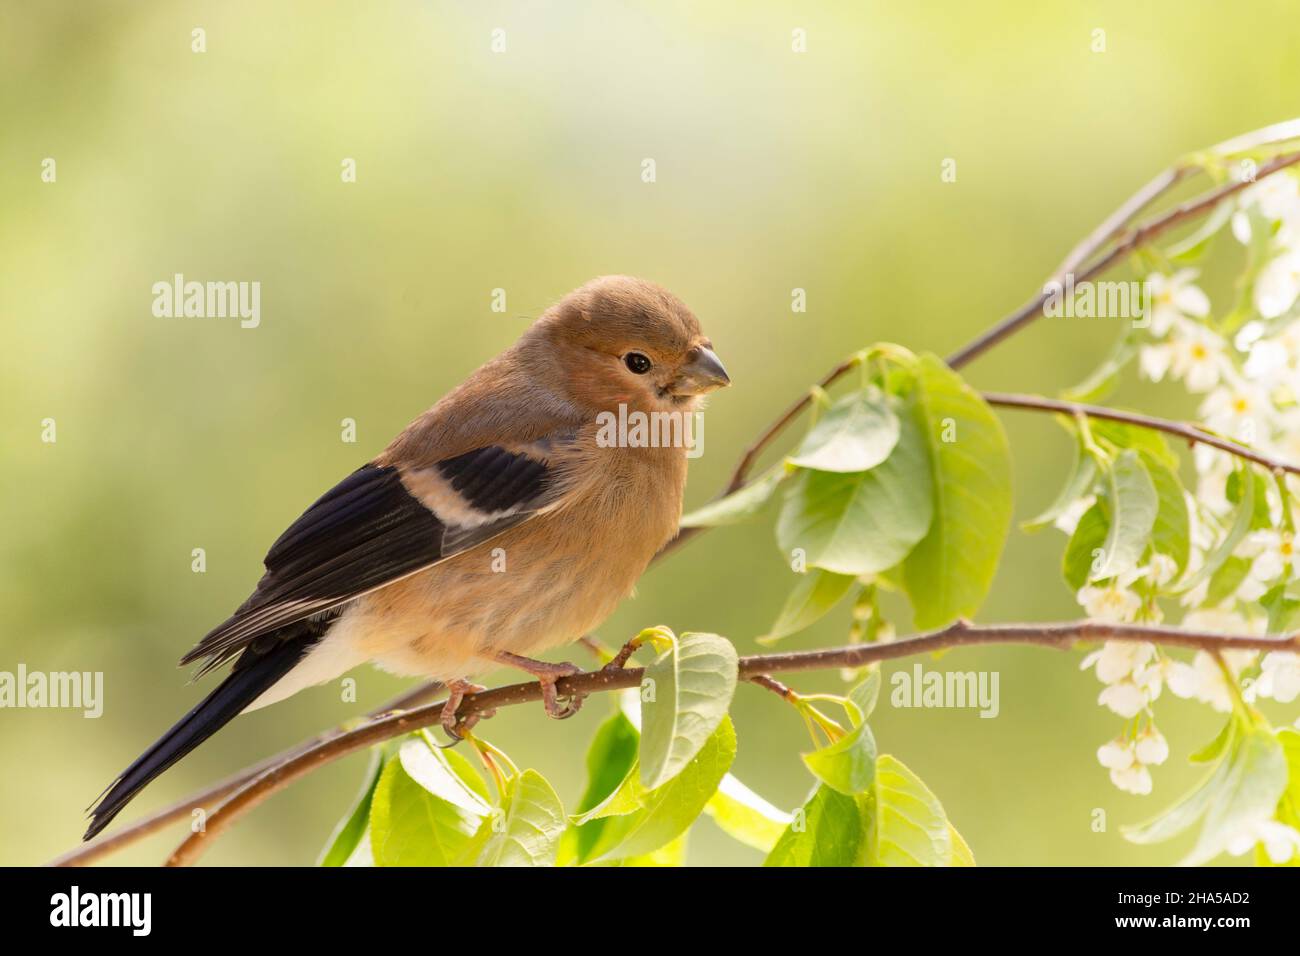 young bullfinch is standing on a flower branch Stock Photo